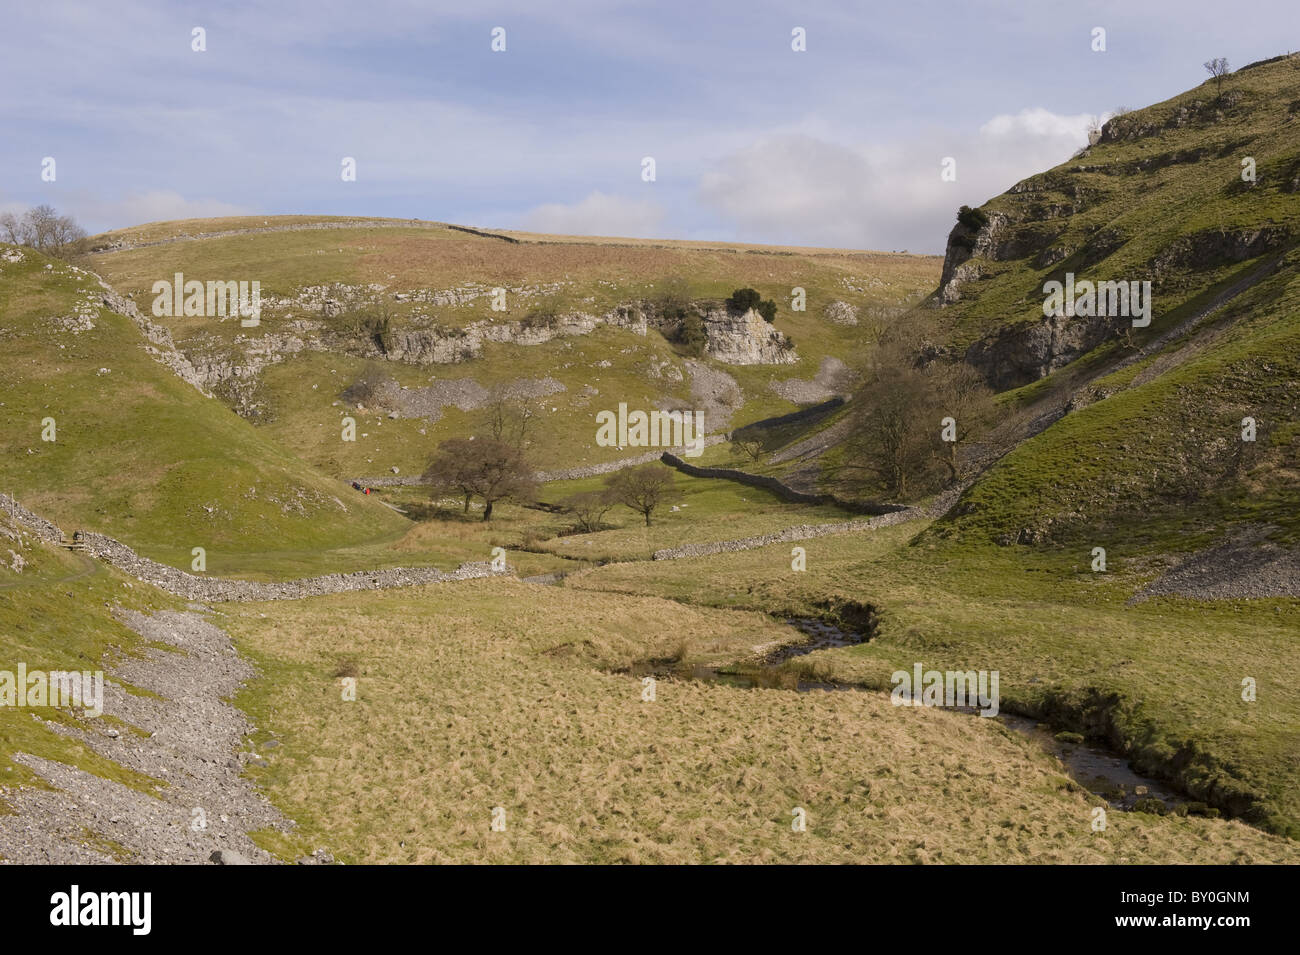 View along Trollers Gill, a quiet remote steep-sided limestone gorge with meandering stream or beck - near Skyreholme, Yorkshire Dales, England, UK. Stock Photo